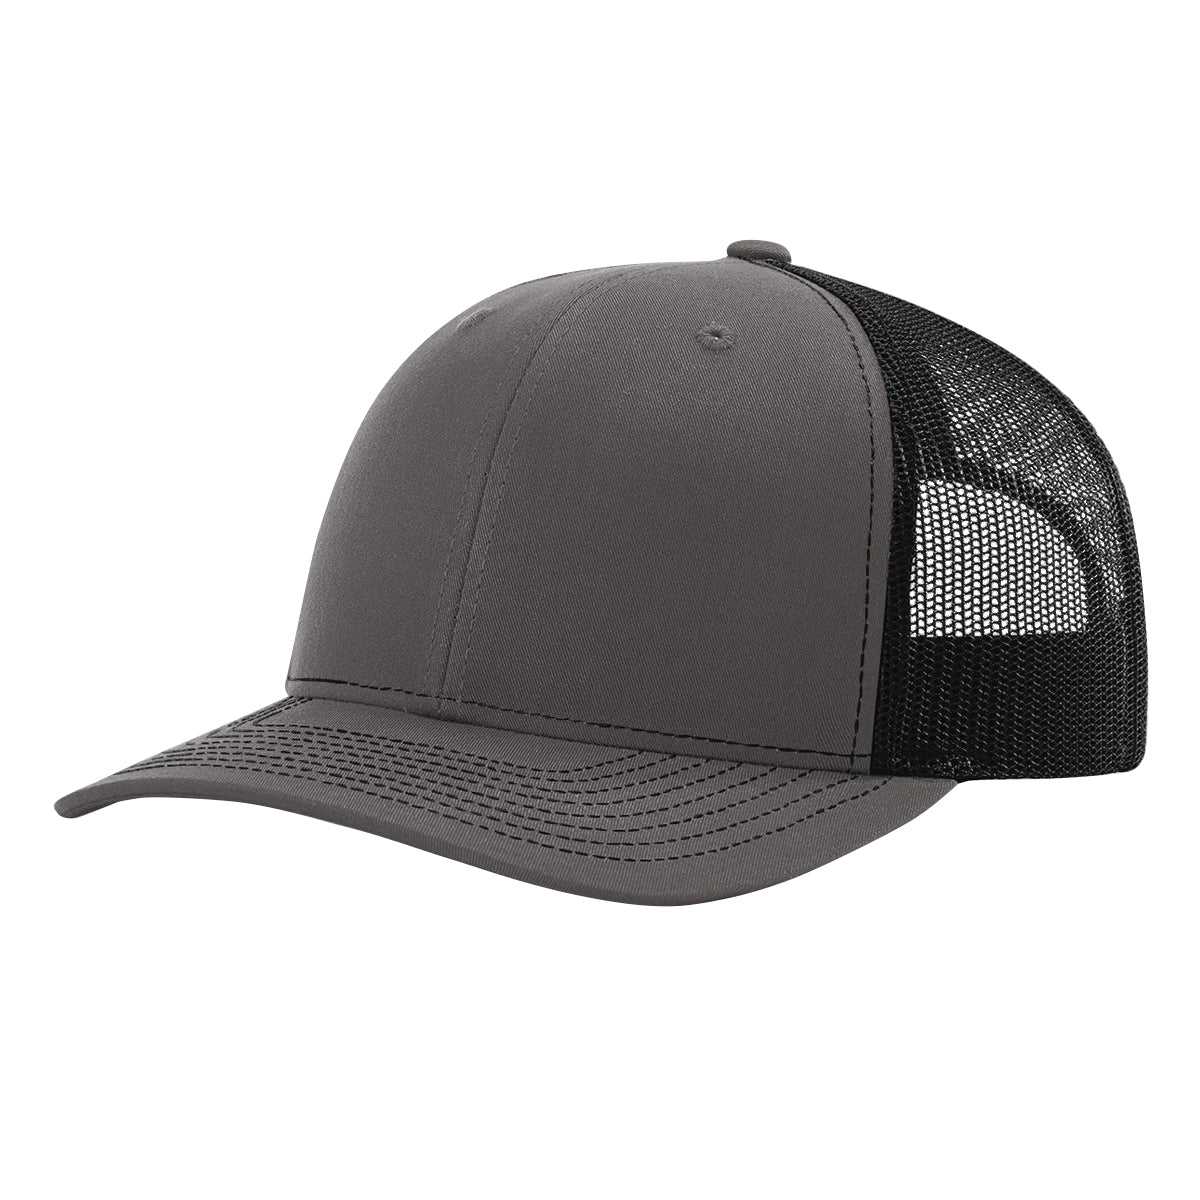 100 Richardson 112 Customized Trucker Hats with Leather Patch